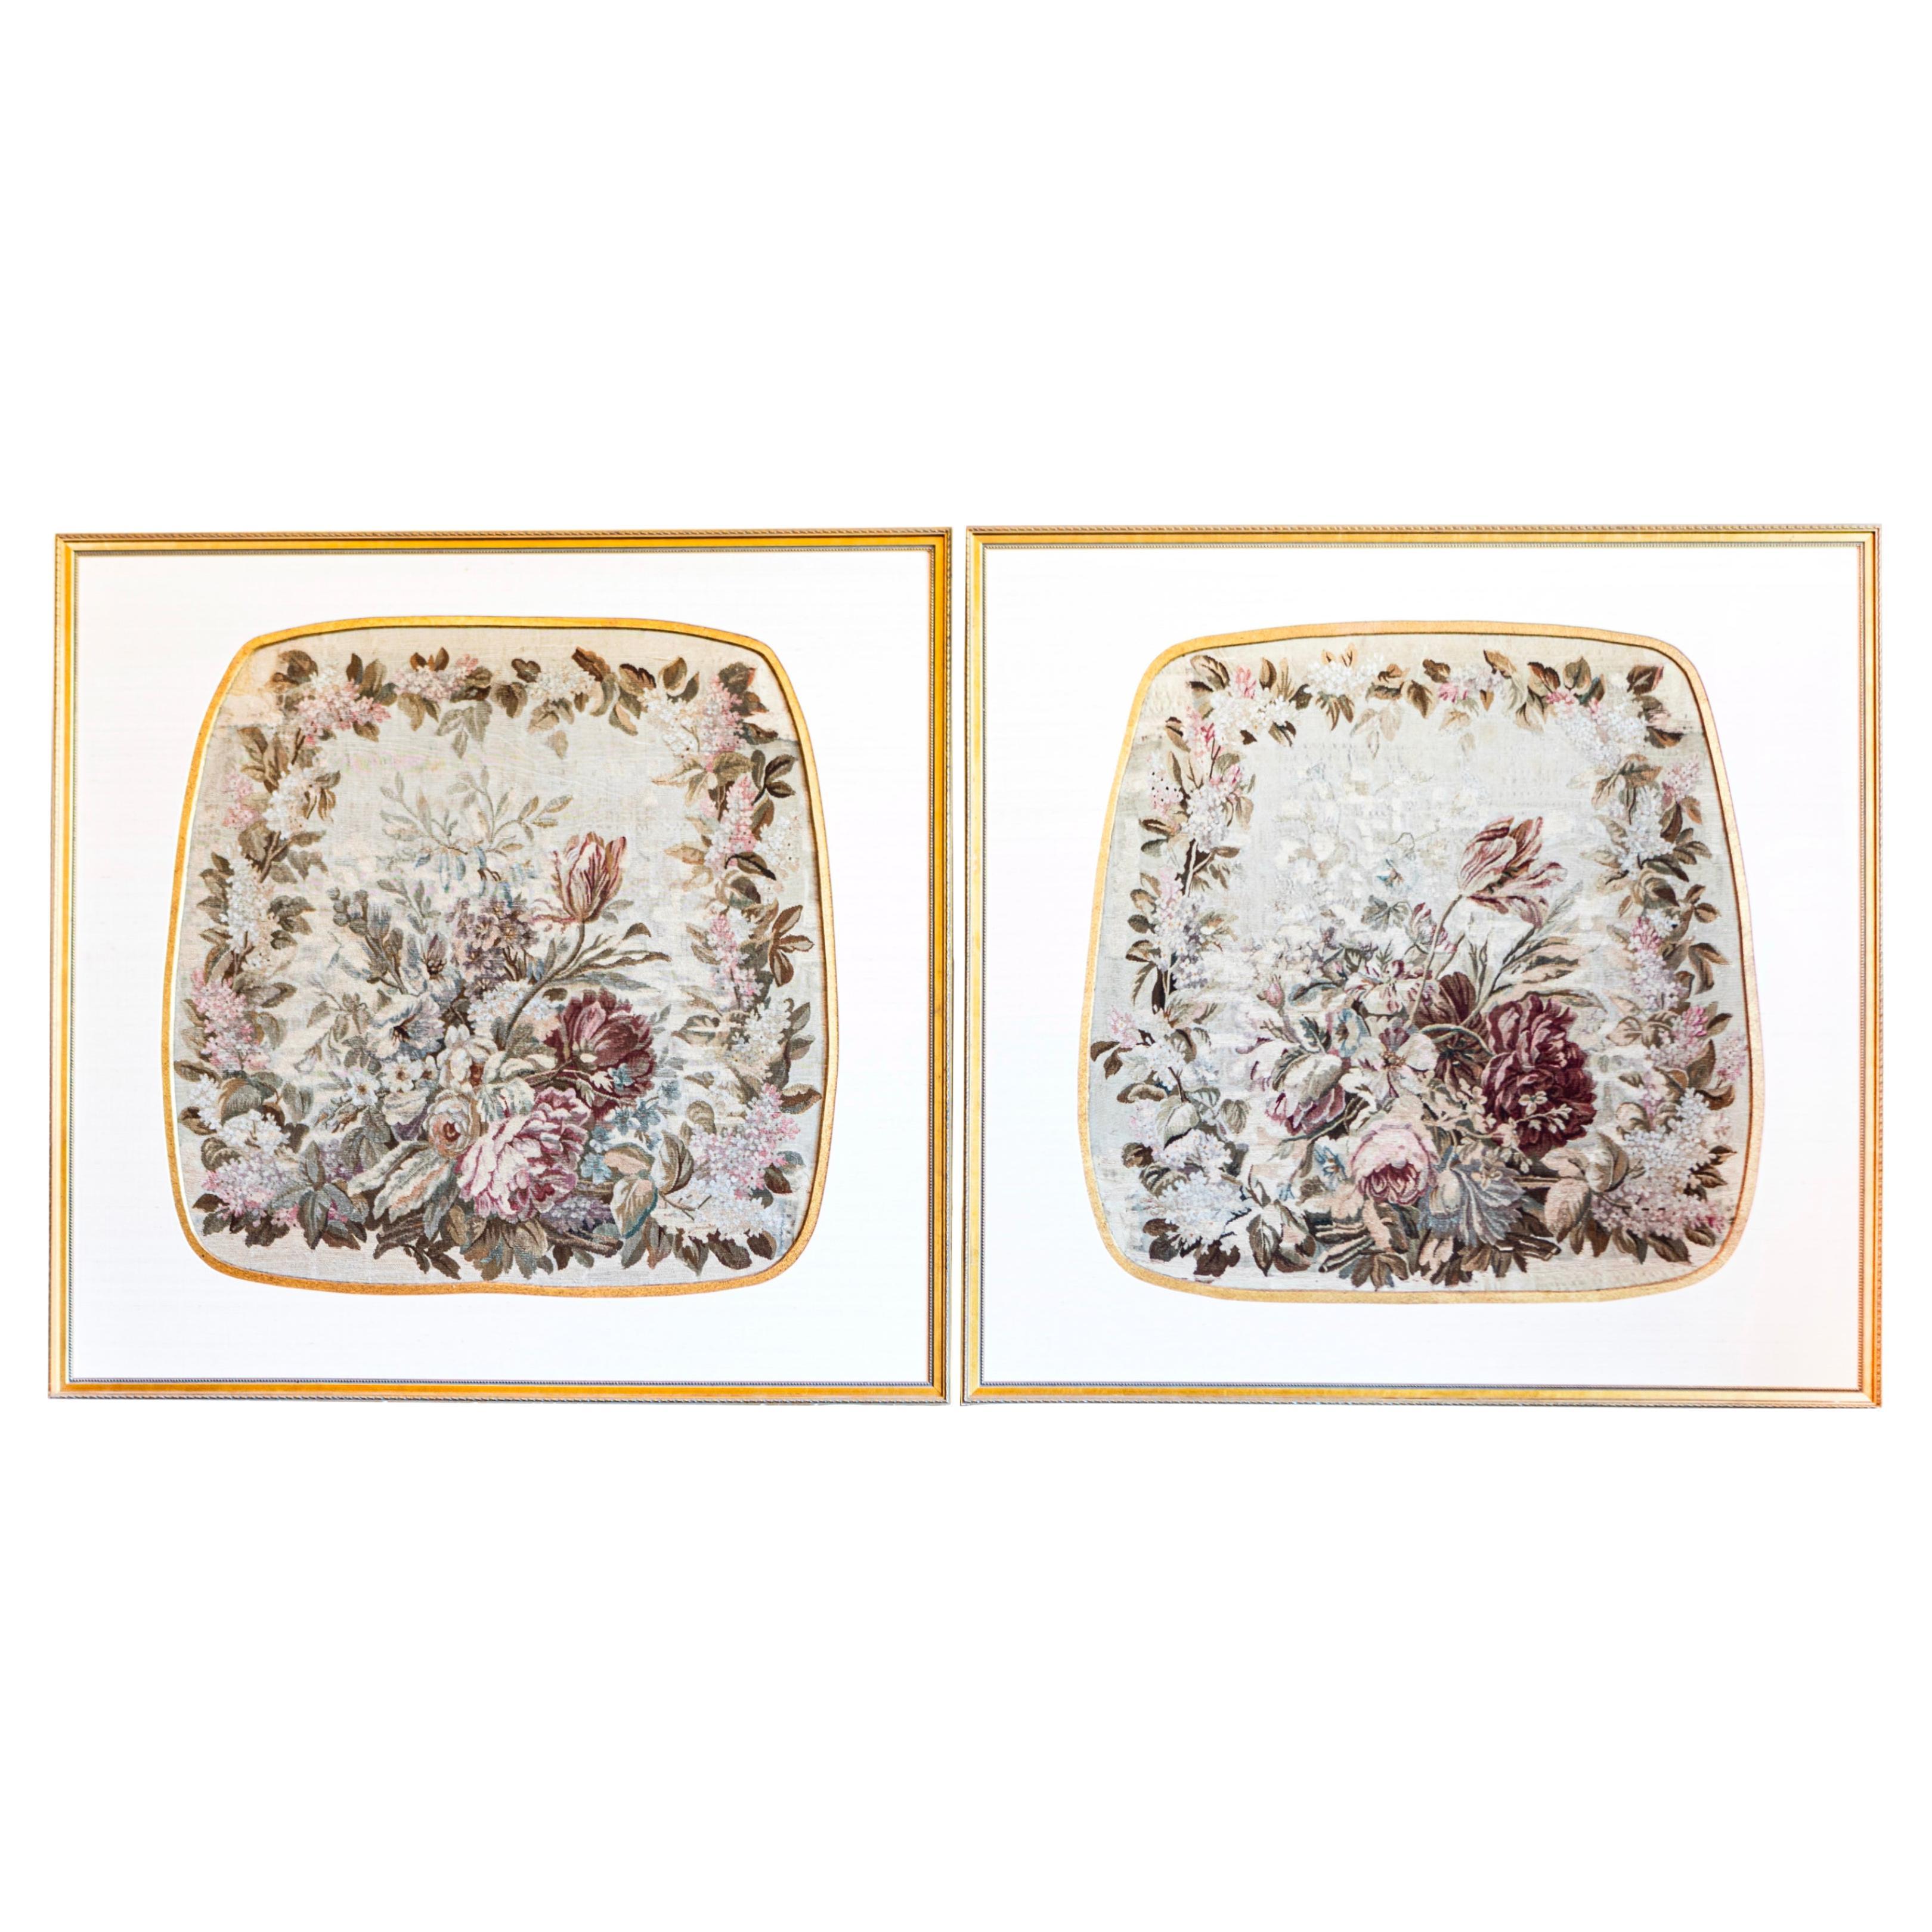 Framed French Silk Aubusson Tapestries with Floral Decor, Sold Individually